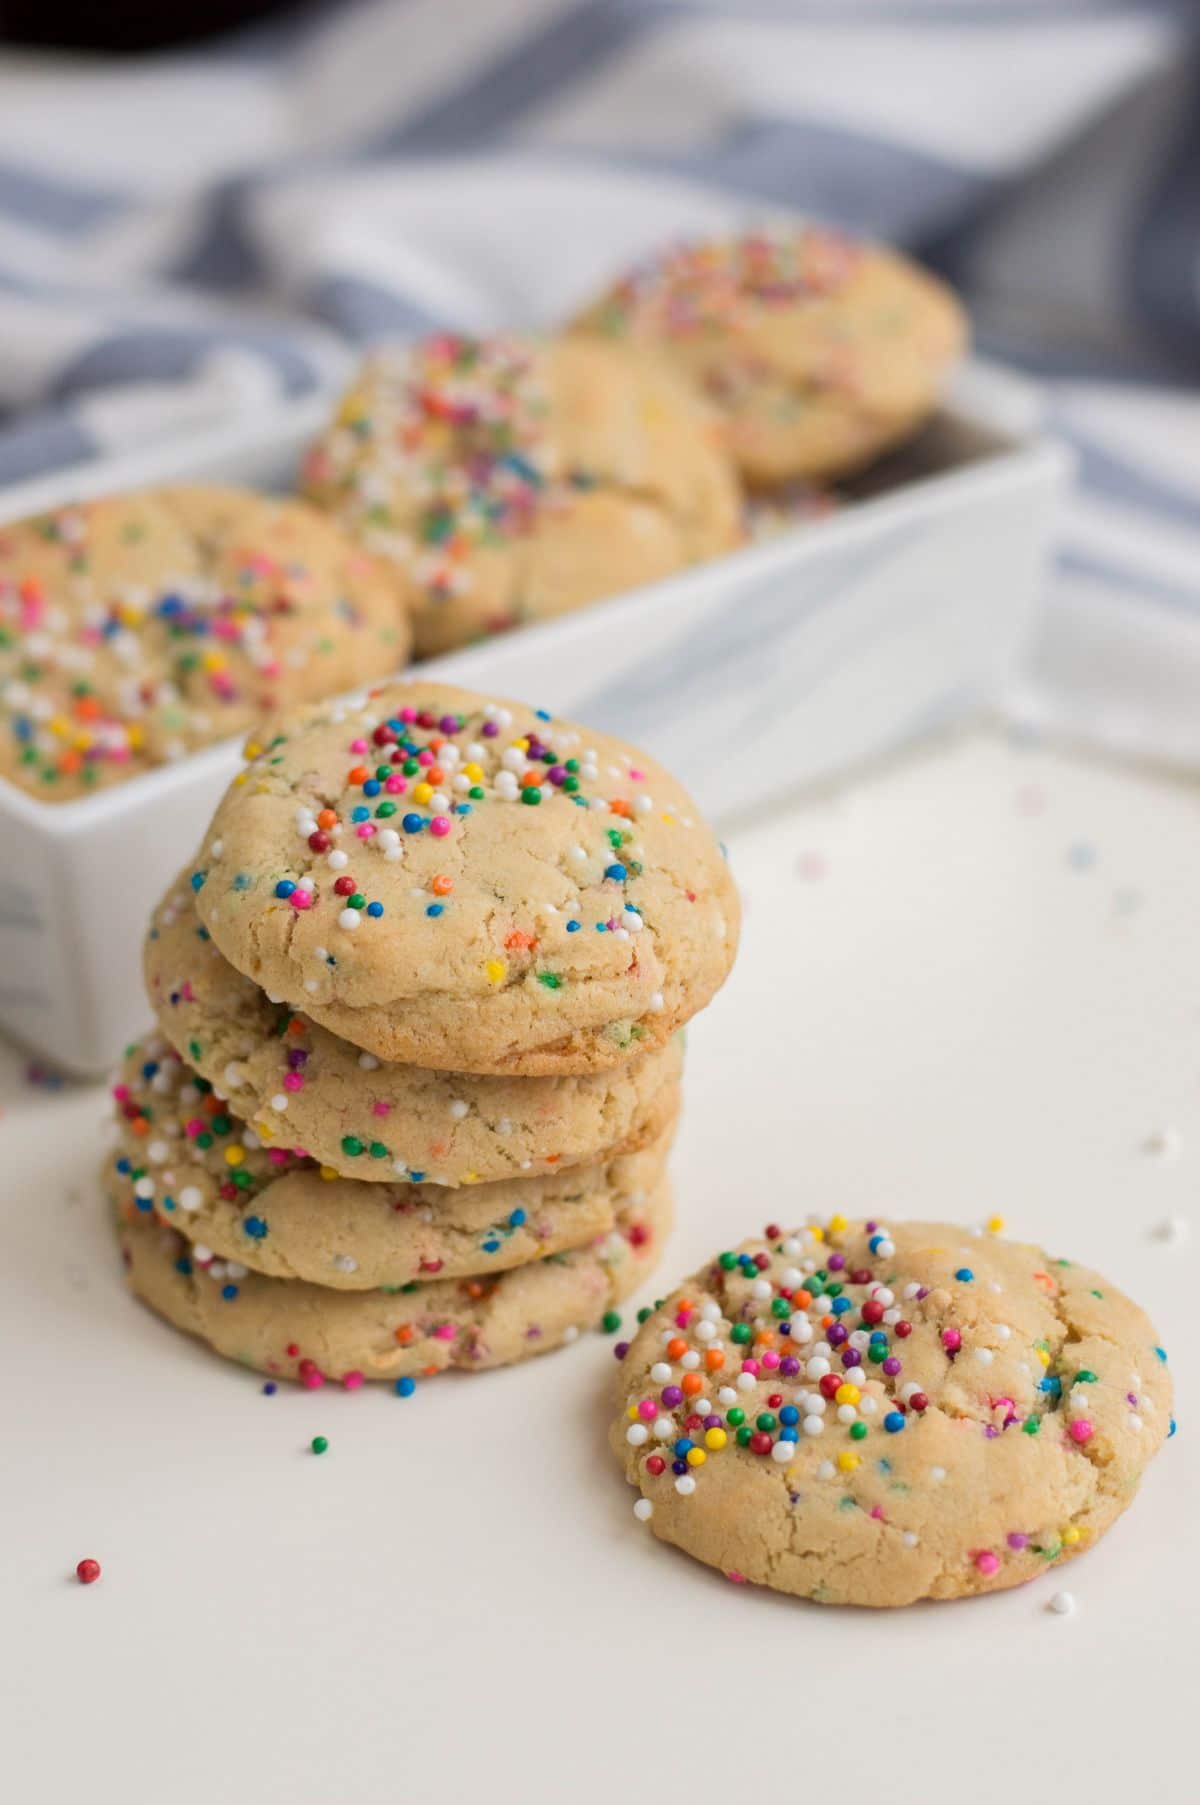 A vertical image of Funfetti cookies, a stack of 4 cookies and a single cookie beside the stack.